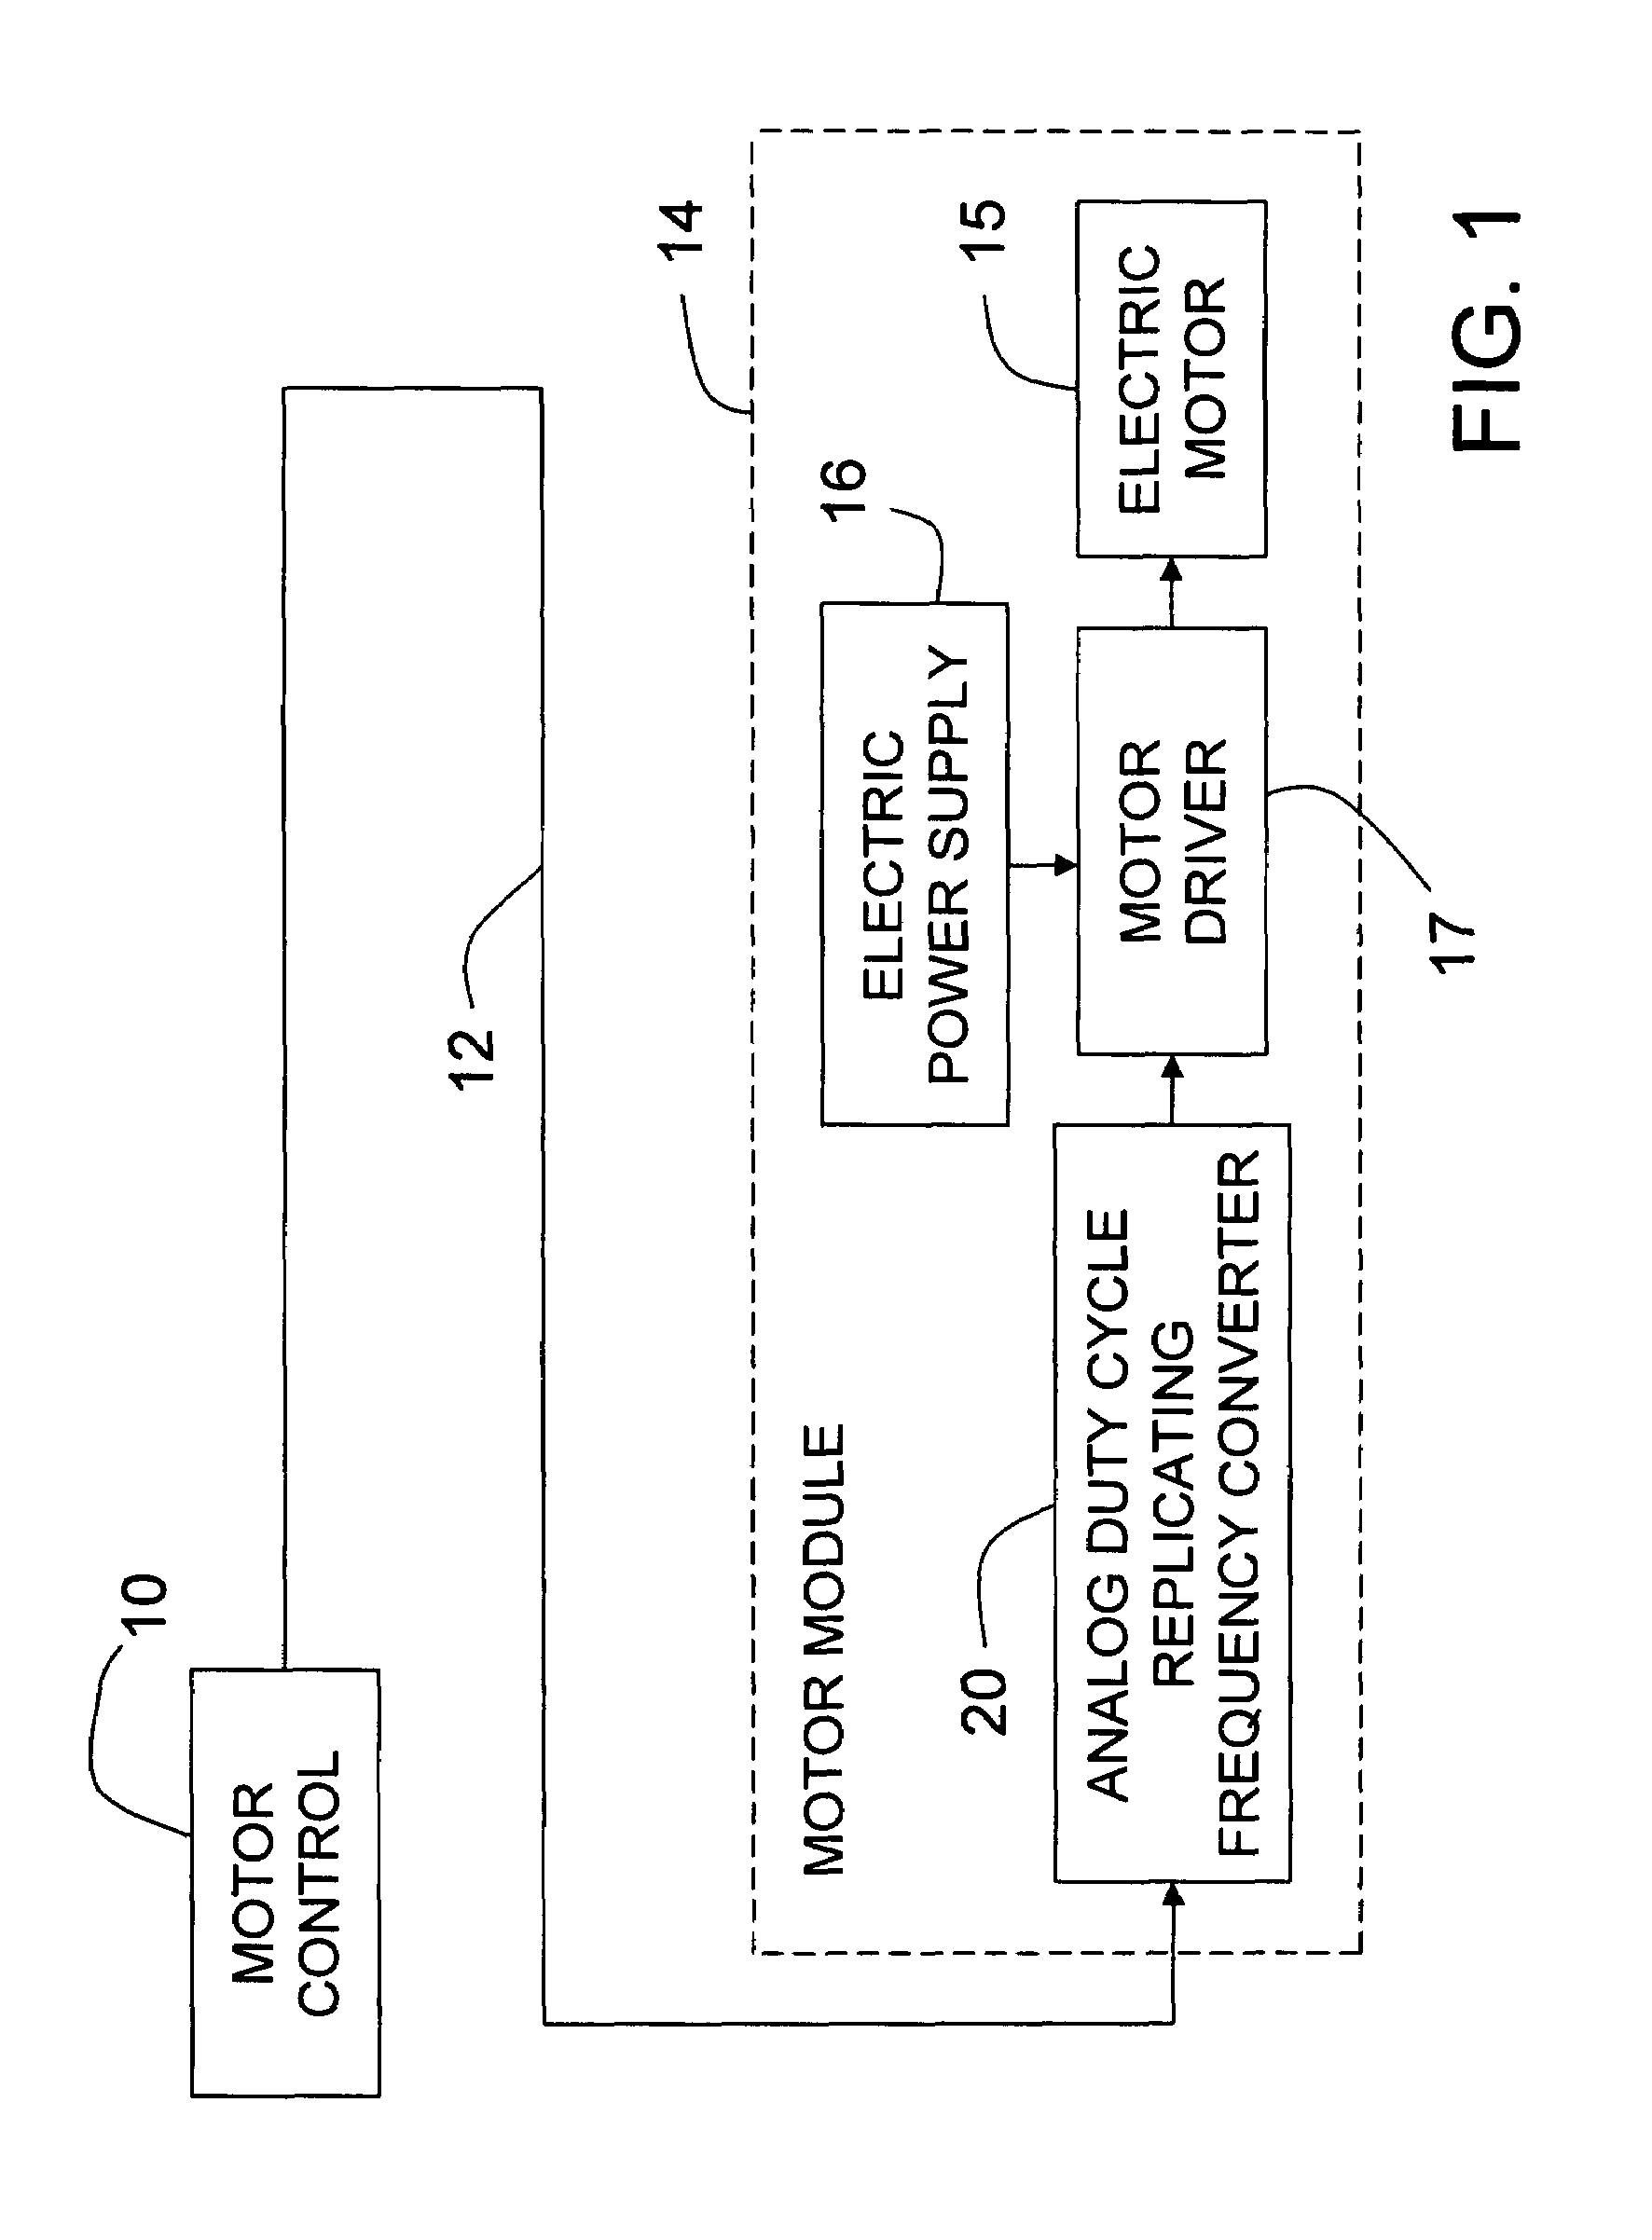 Analog duty cycle replicating frequency converter for PWM signals